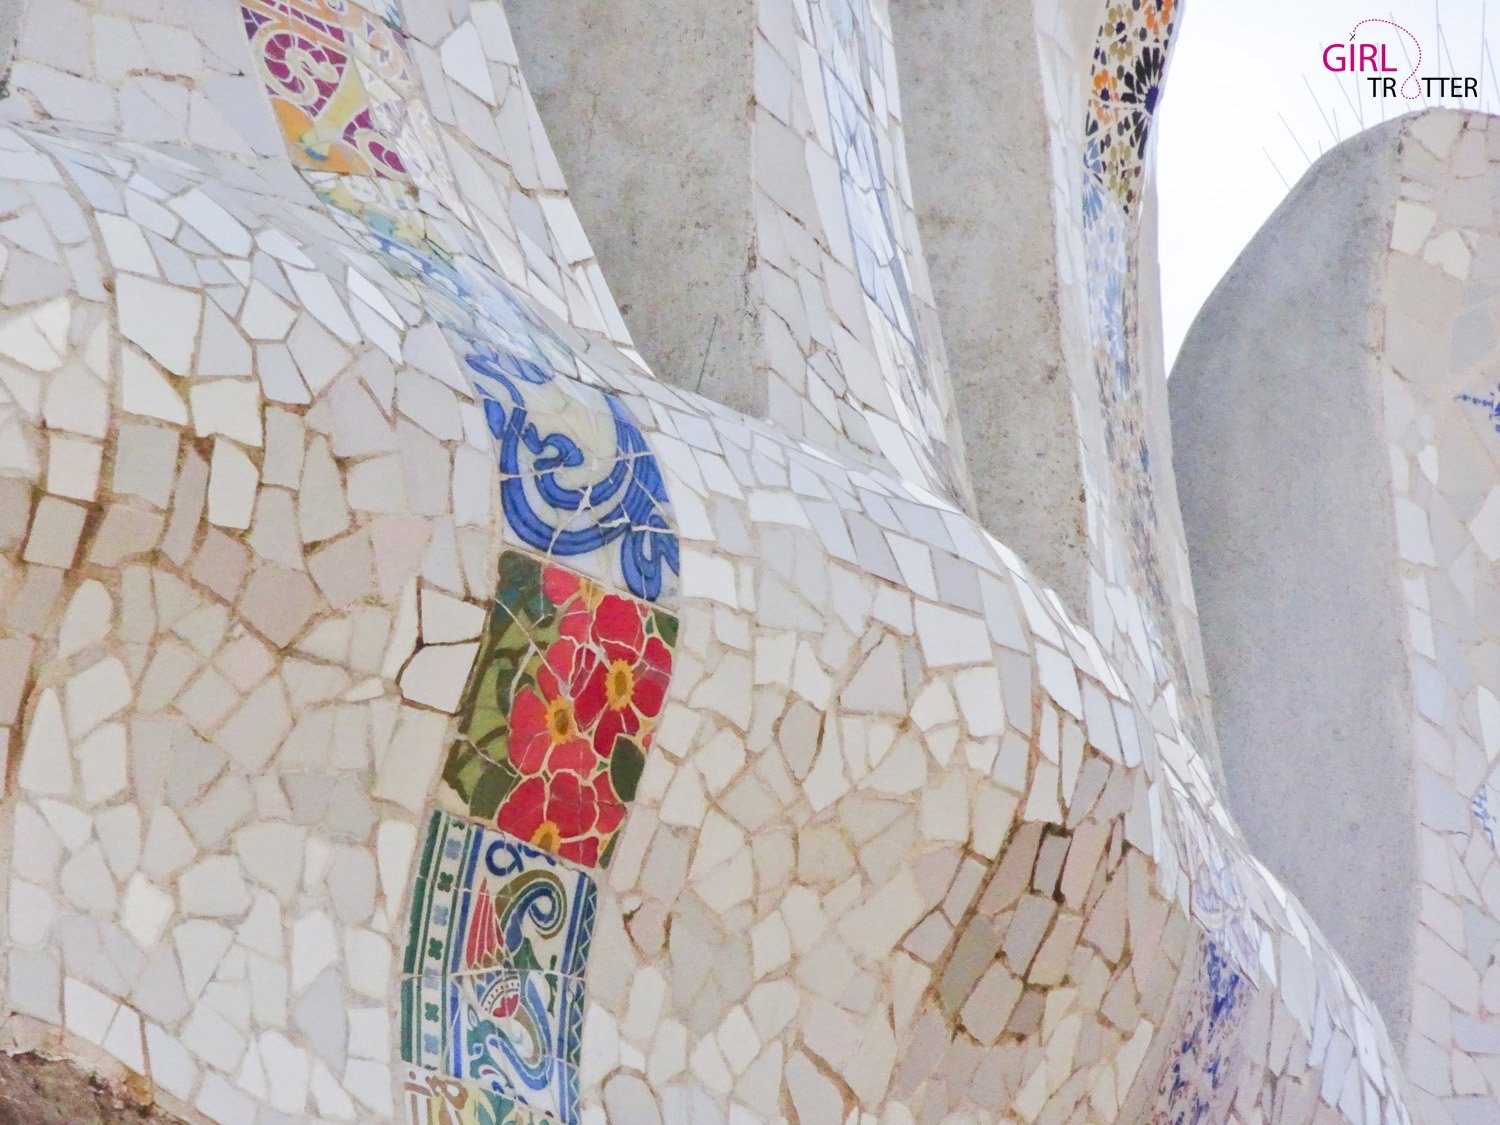 Parc Guell - Le Barcelone de Gaudi by Girltrotter